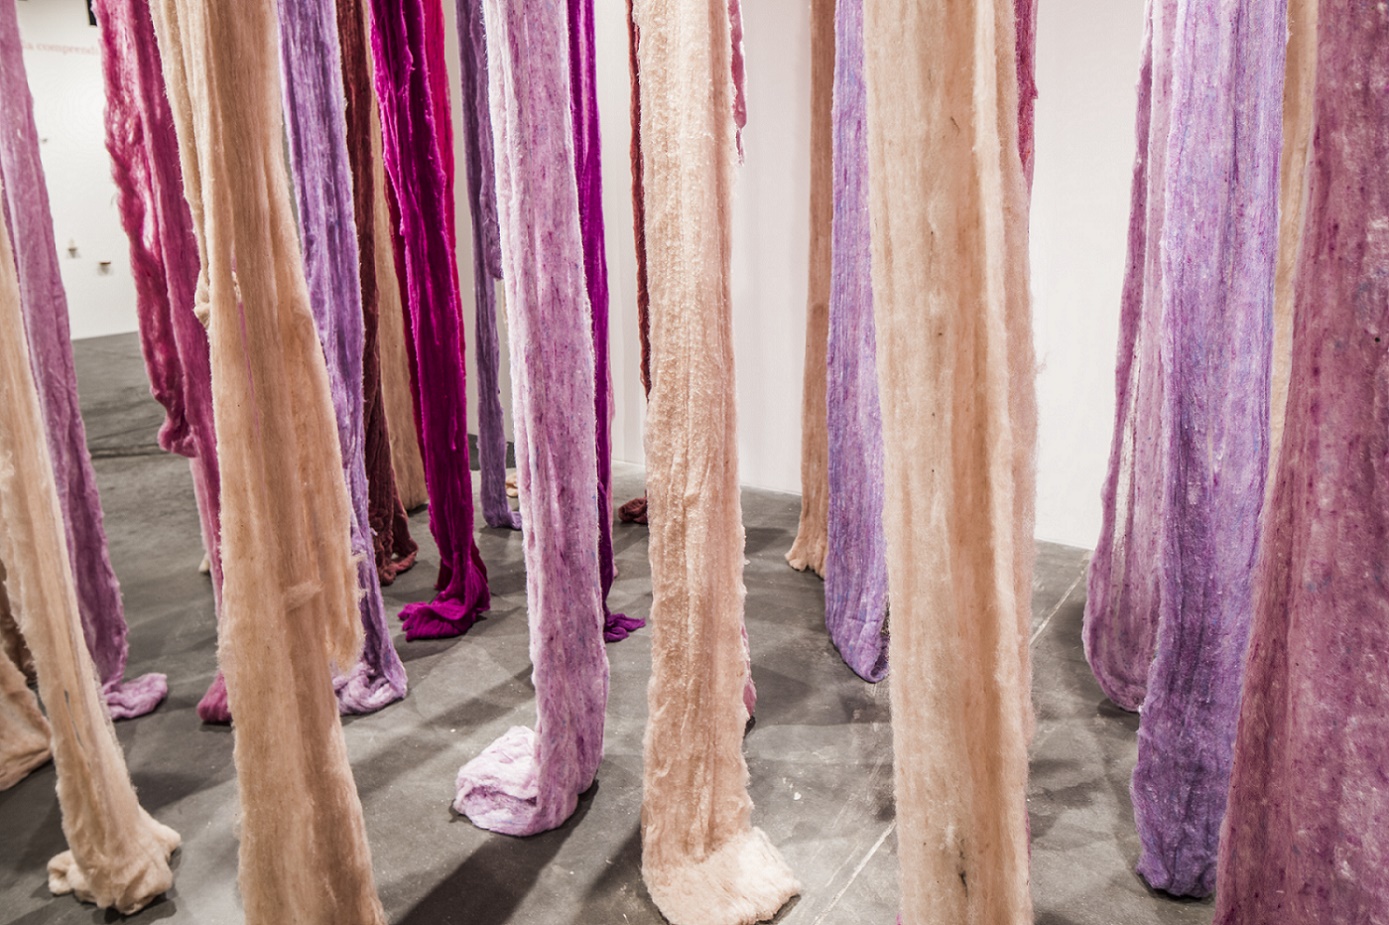 Quipu Visceral, Courtesy of Contemporary Arts Center, New Orleans. Alex Marks Photography.